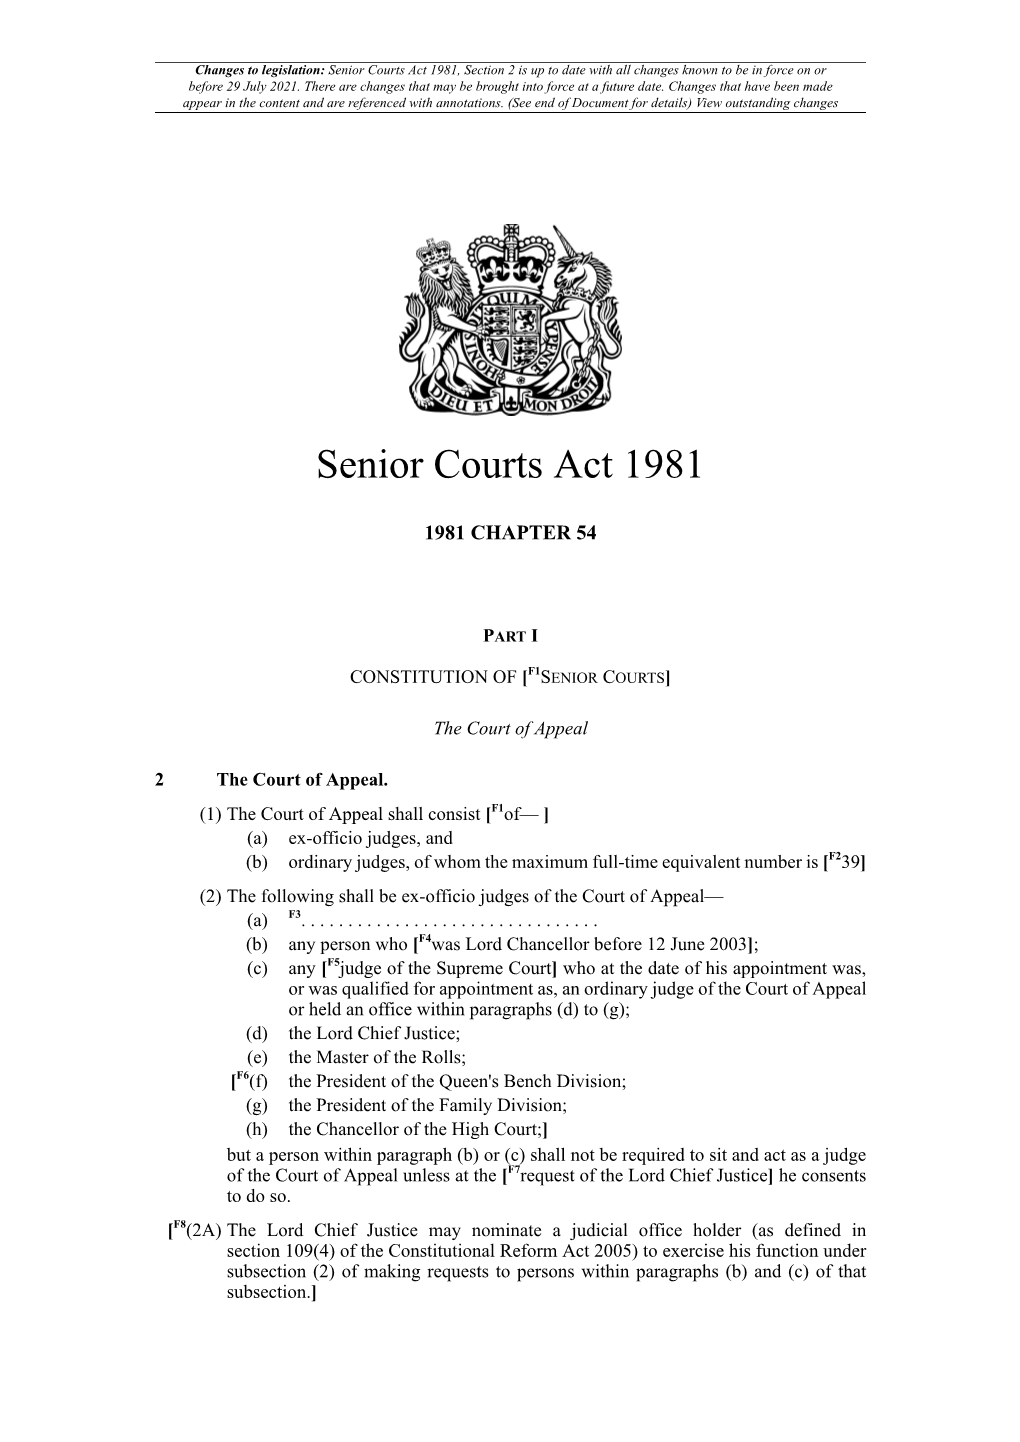 Senior Courts Act 1981, Section 2 Is up to Date with All Changes Known to Be in Force on Or Before 29 July 2021